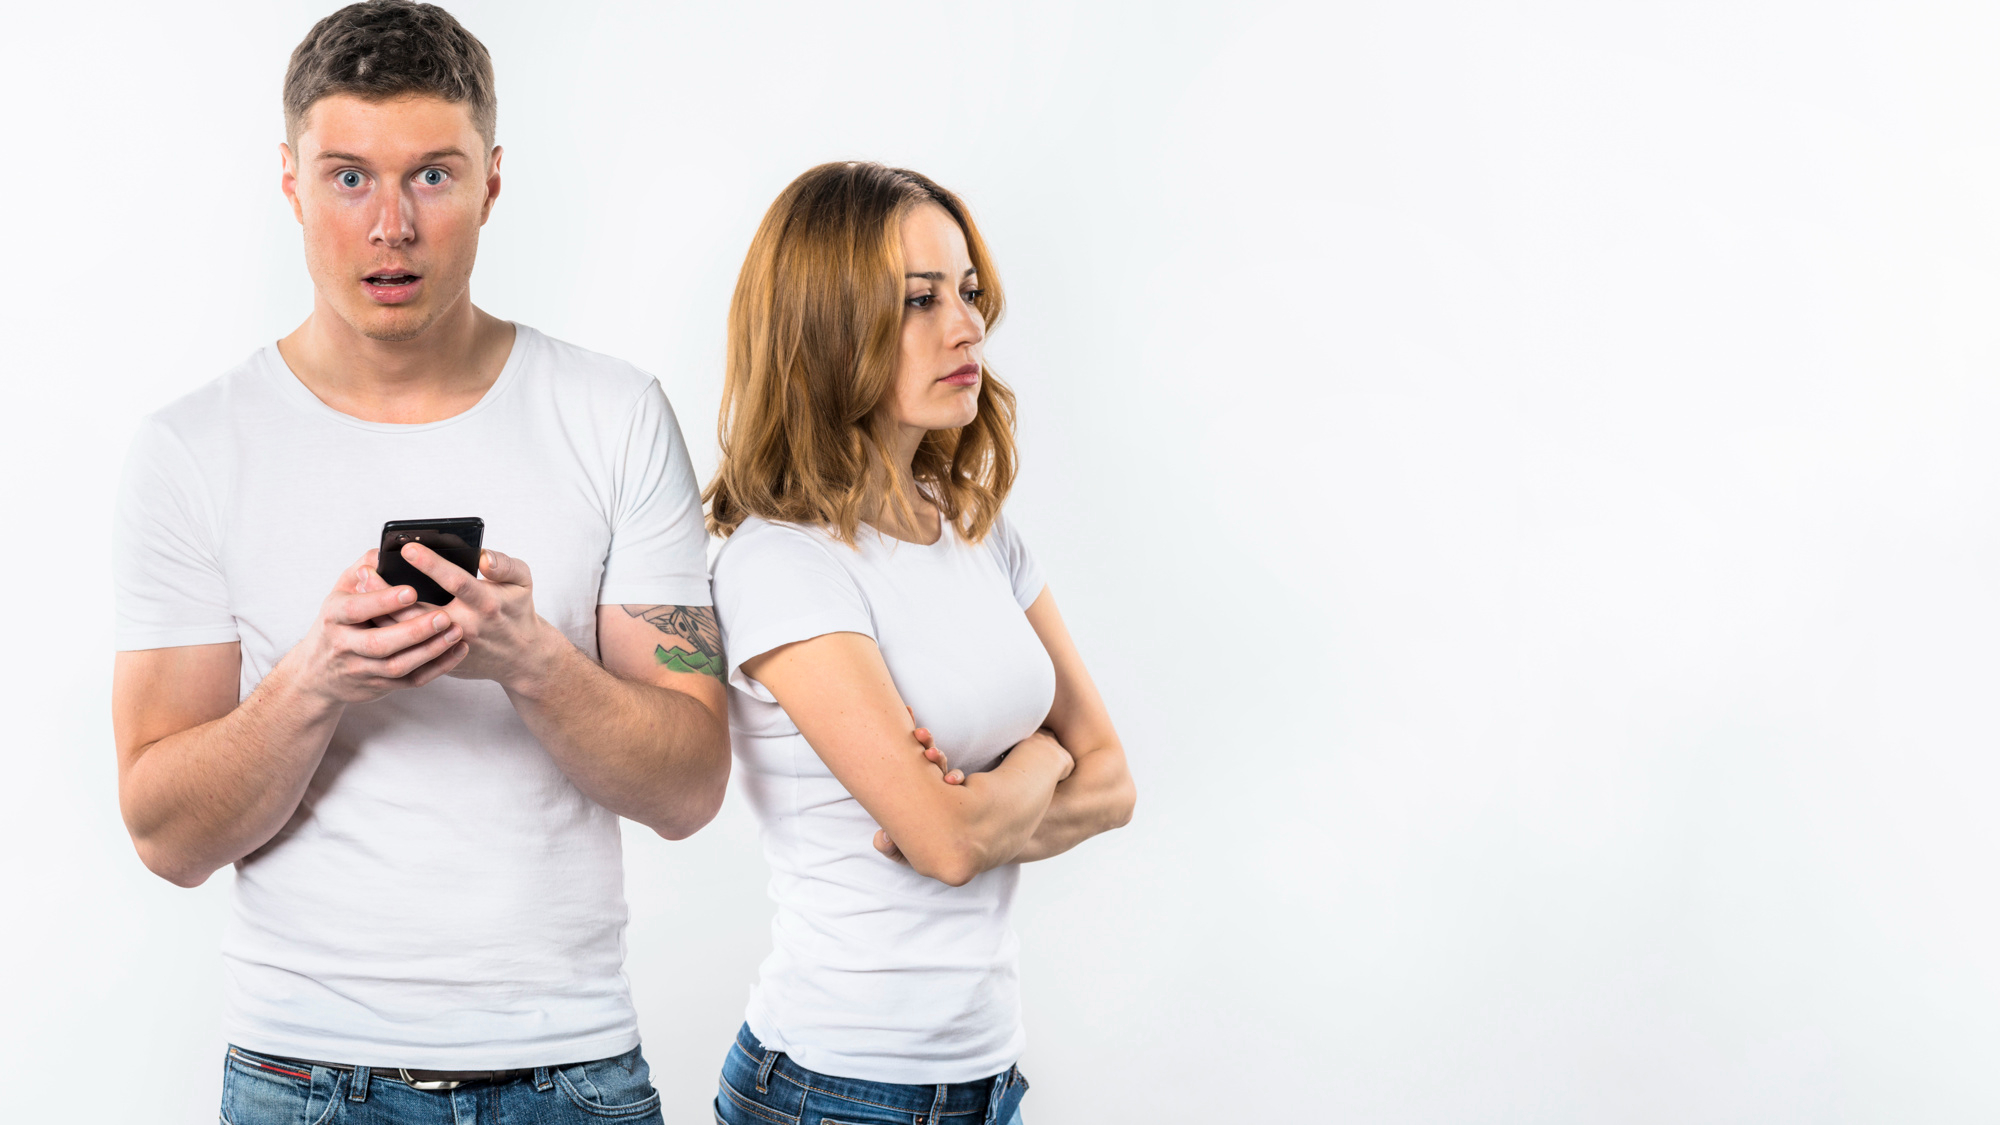 A man reacting shocked to something on a phone while his girlfriend looks upset | Source: Freepik